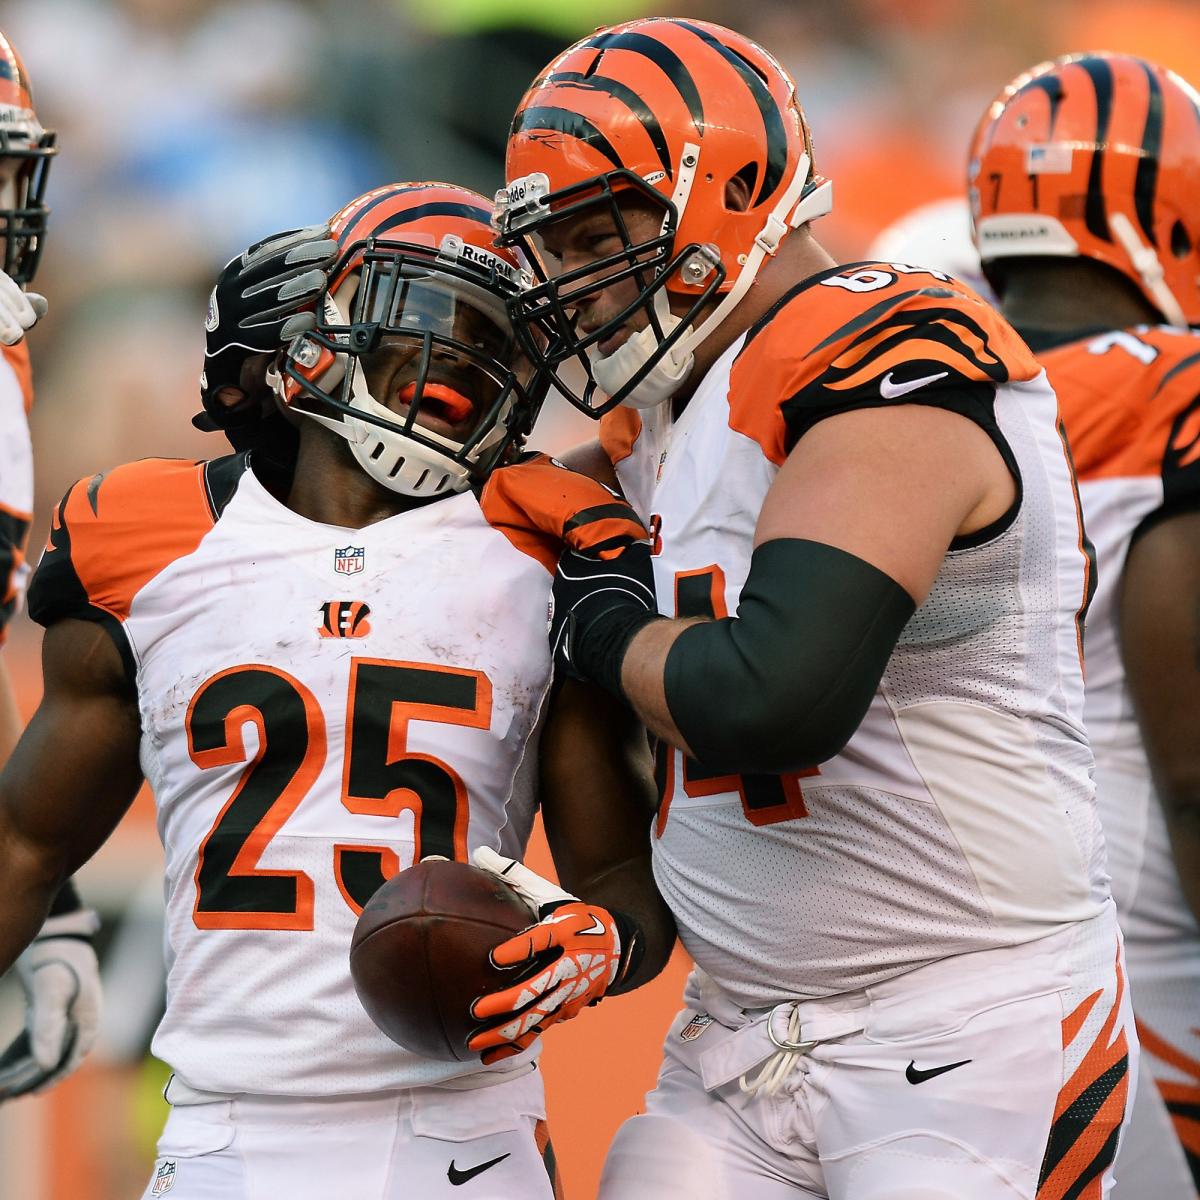 Cincinnati Bengals Roster 2013 Latest Cuts, Depth Charts and Analysis